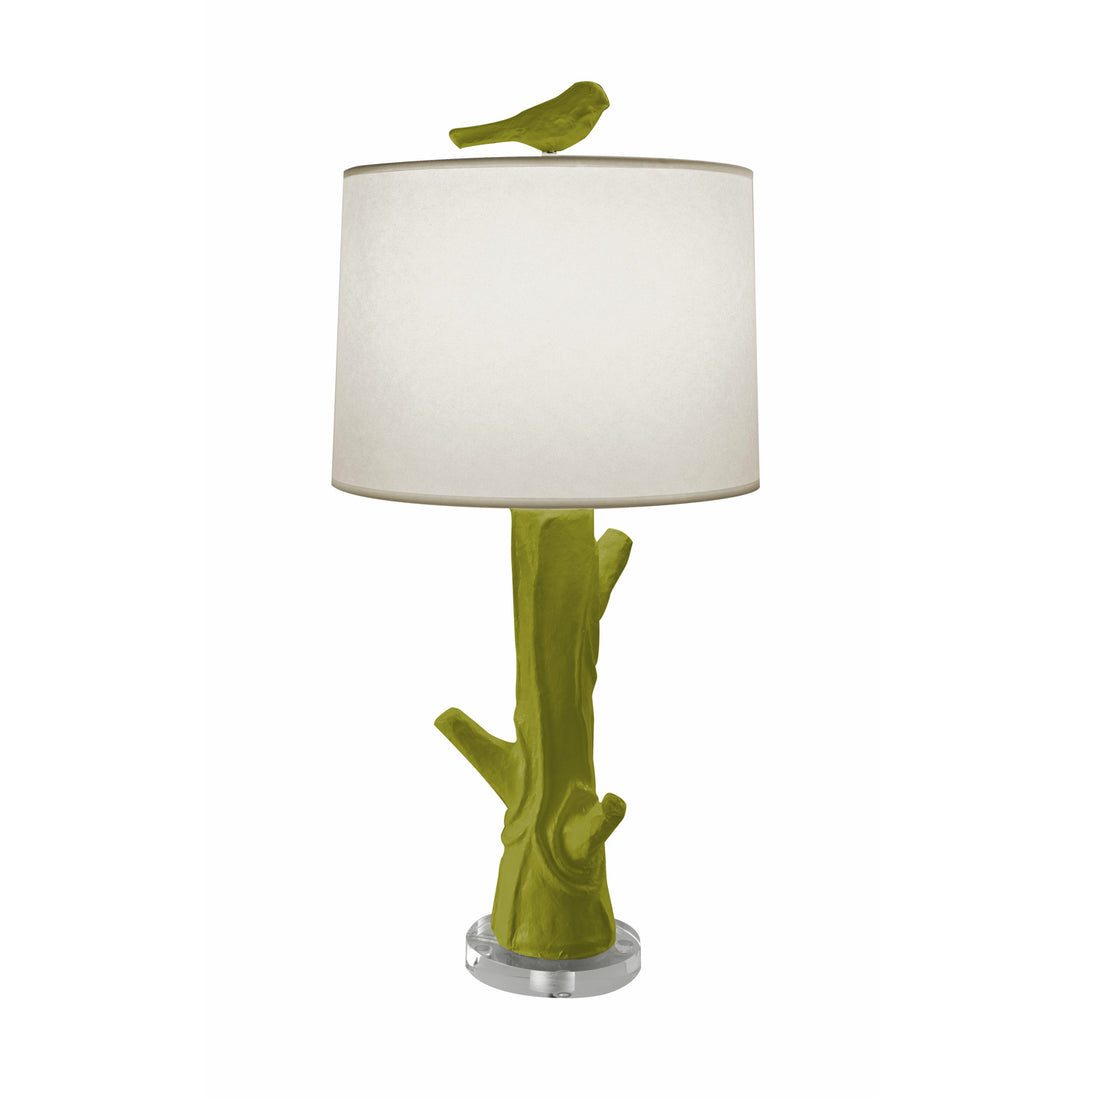 Steph Wood Table Lamp in green by Stray Dog Designs, Paper mache